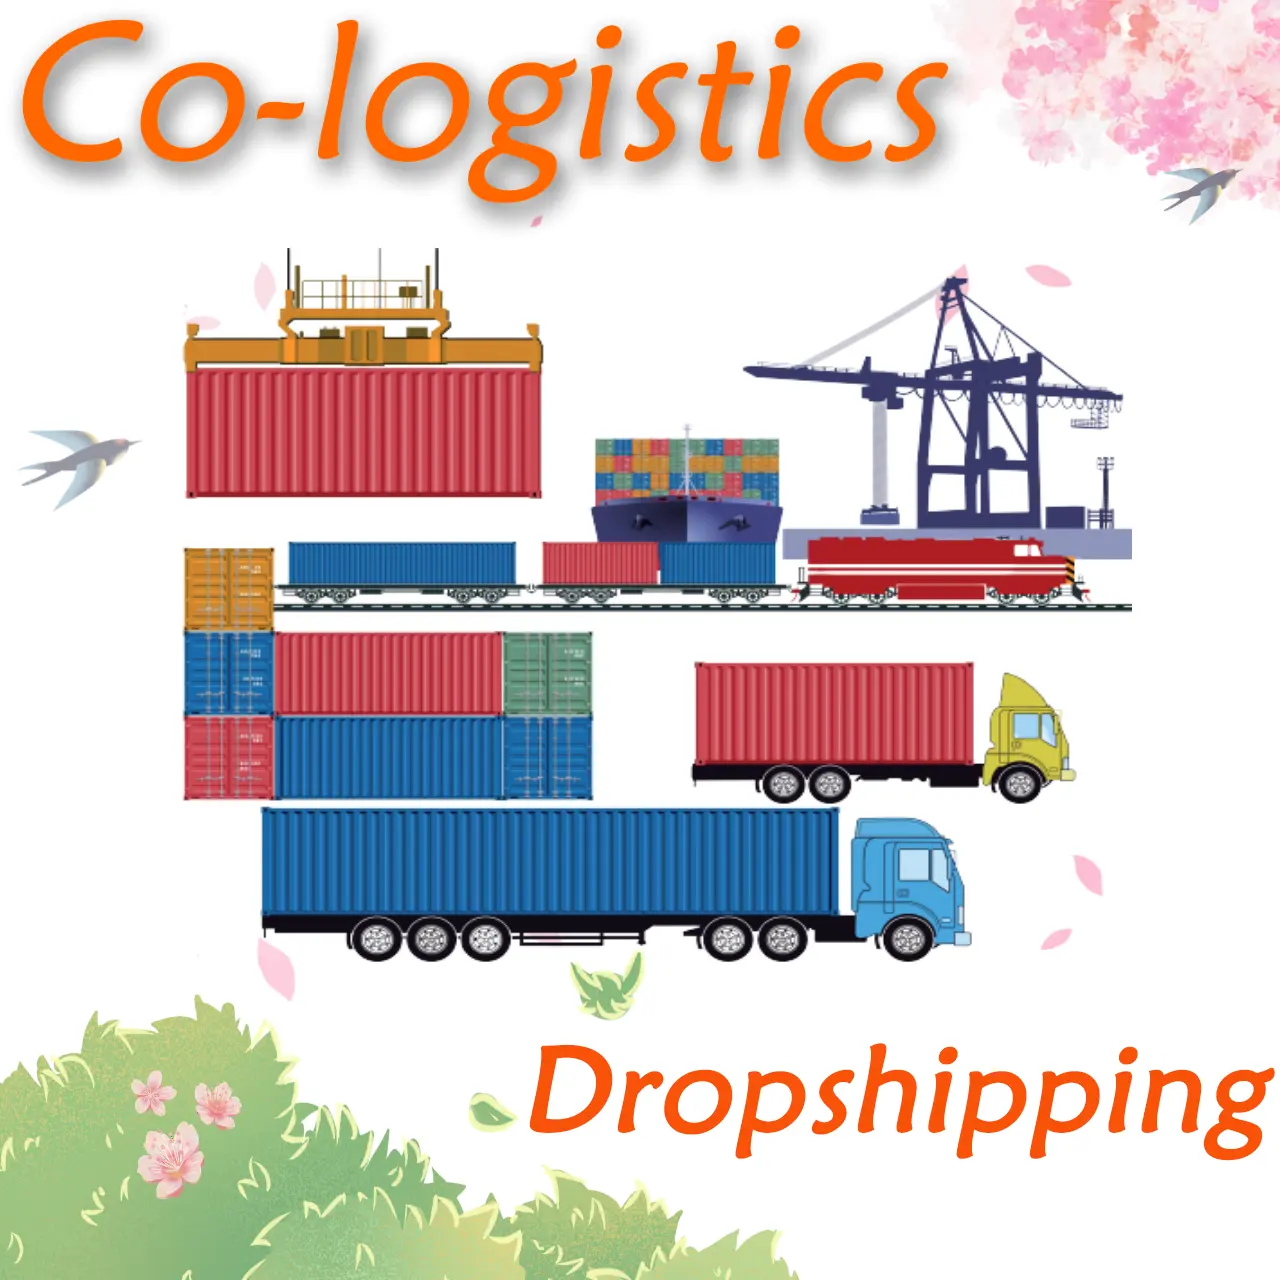 DDP door to door logistics services from China to US LCL FCL cheap rate DDP ship vessel shipping Sea Ocean freight to USA